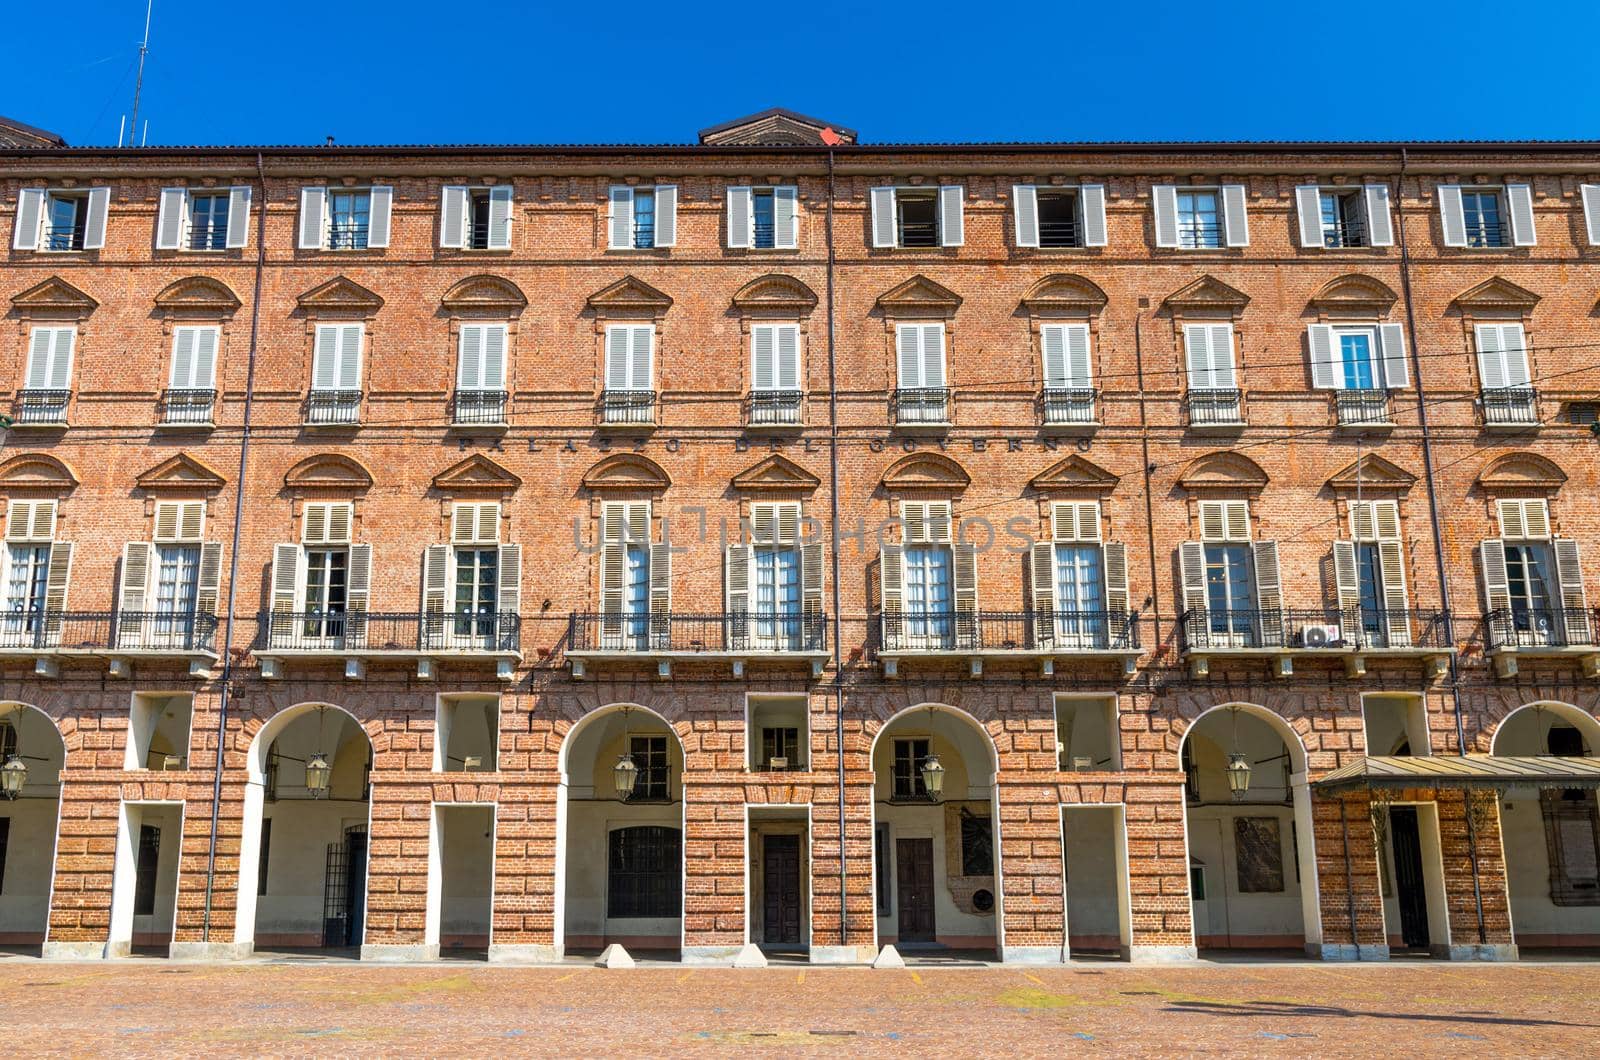 Prefecture Palazzo del Governo Palace brick building with arches, windows and shutters on Castle Square Piazza Castello in historical centre of Turin Torino city with clear blue sky, Piedmont, Italy